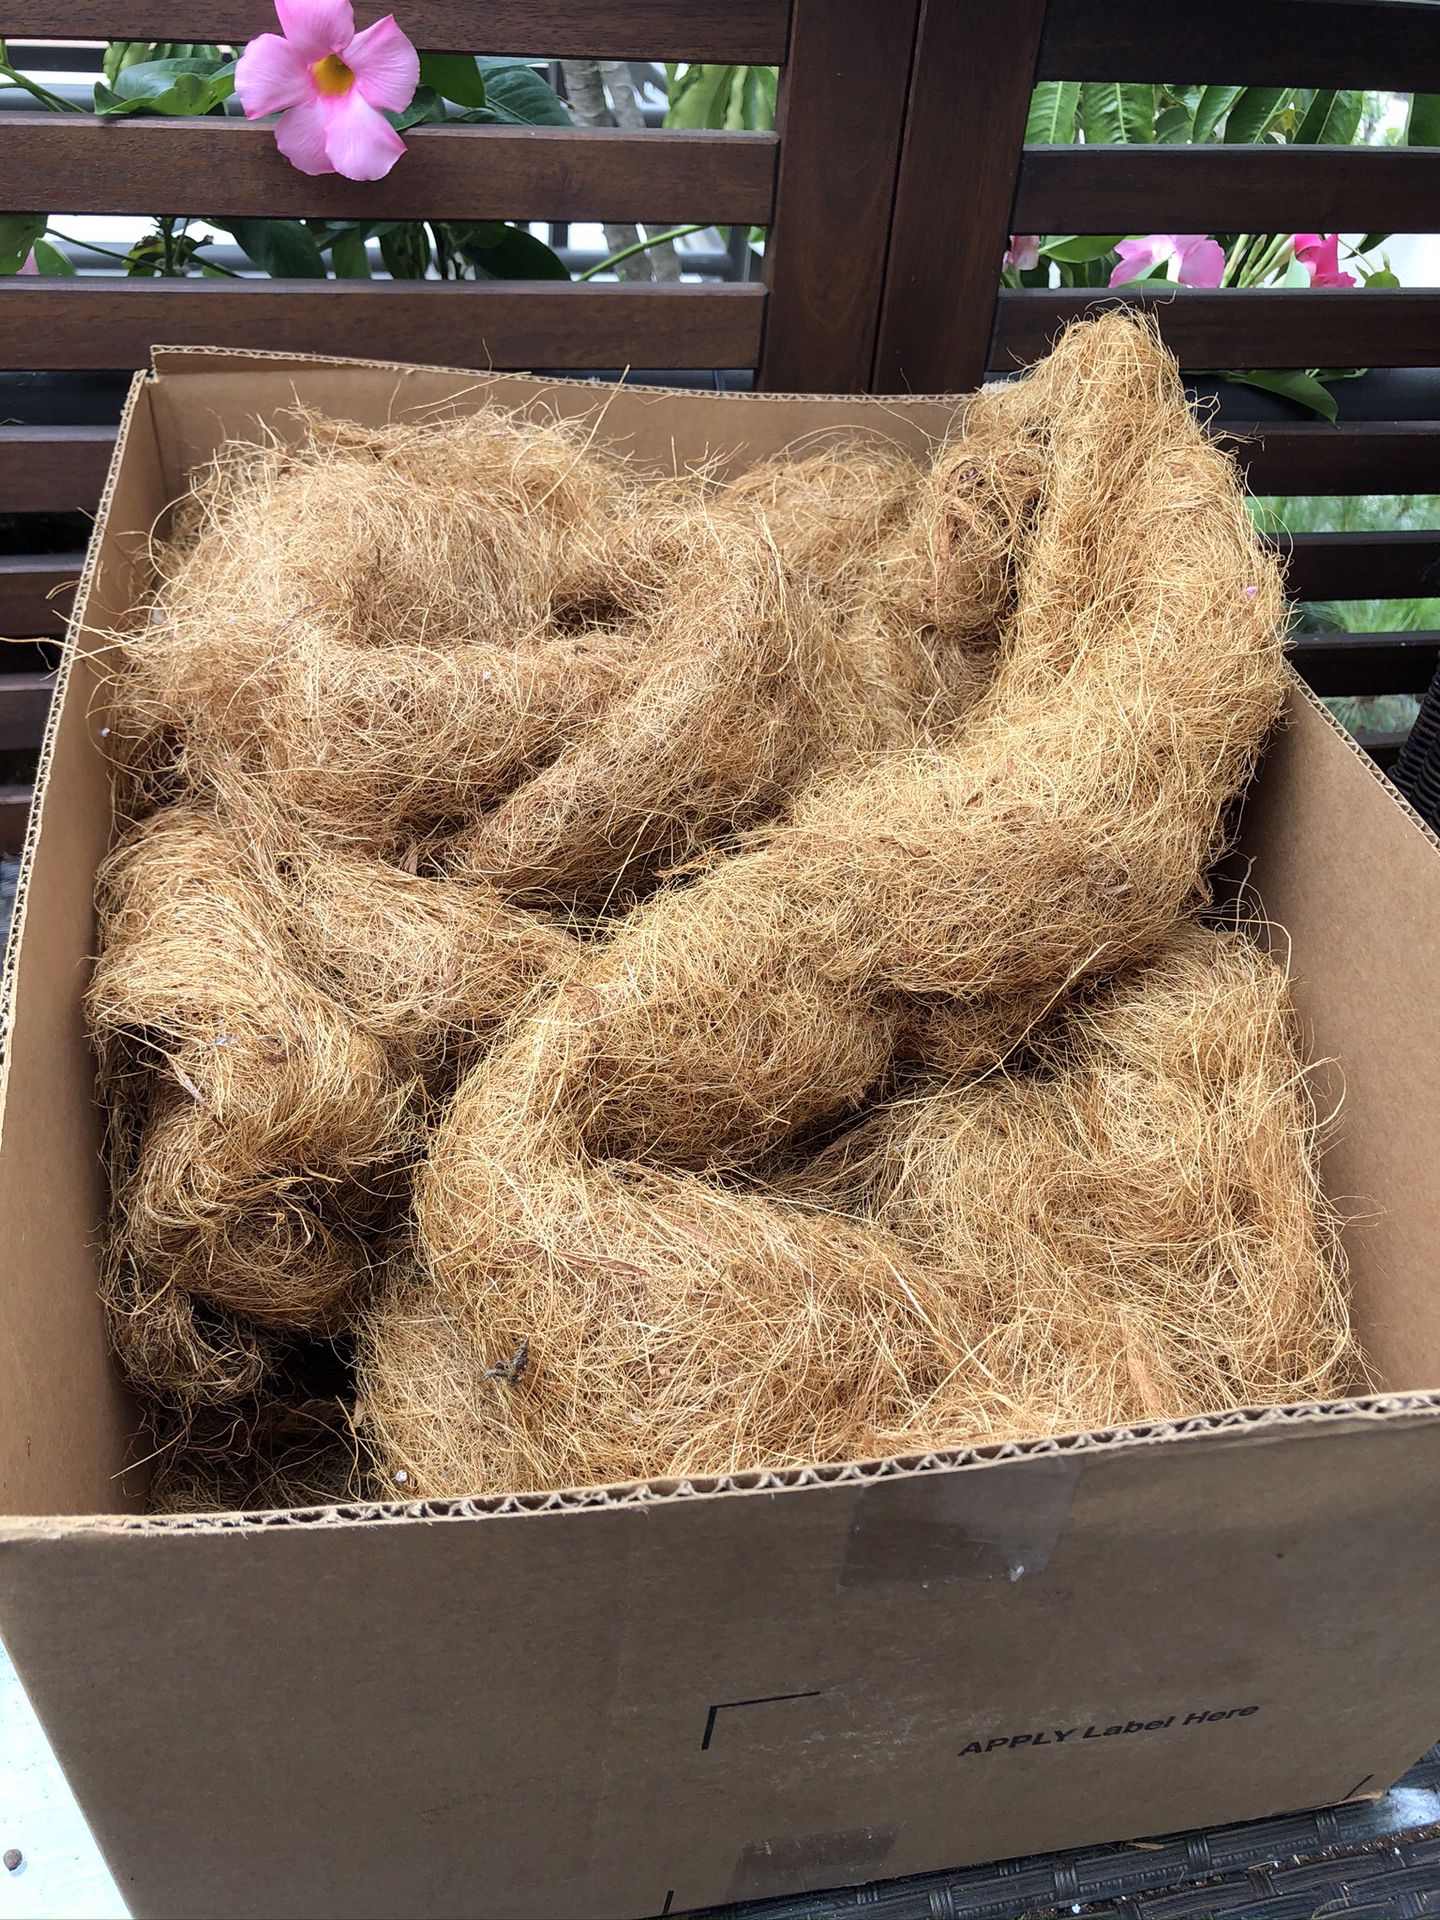 BOX OF OUTDOOR PLANTER FILL - NEW - $10